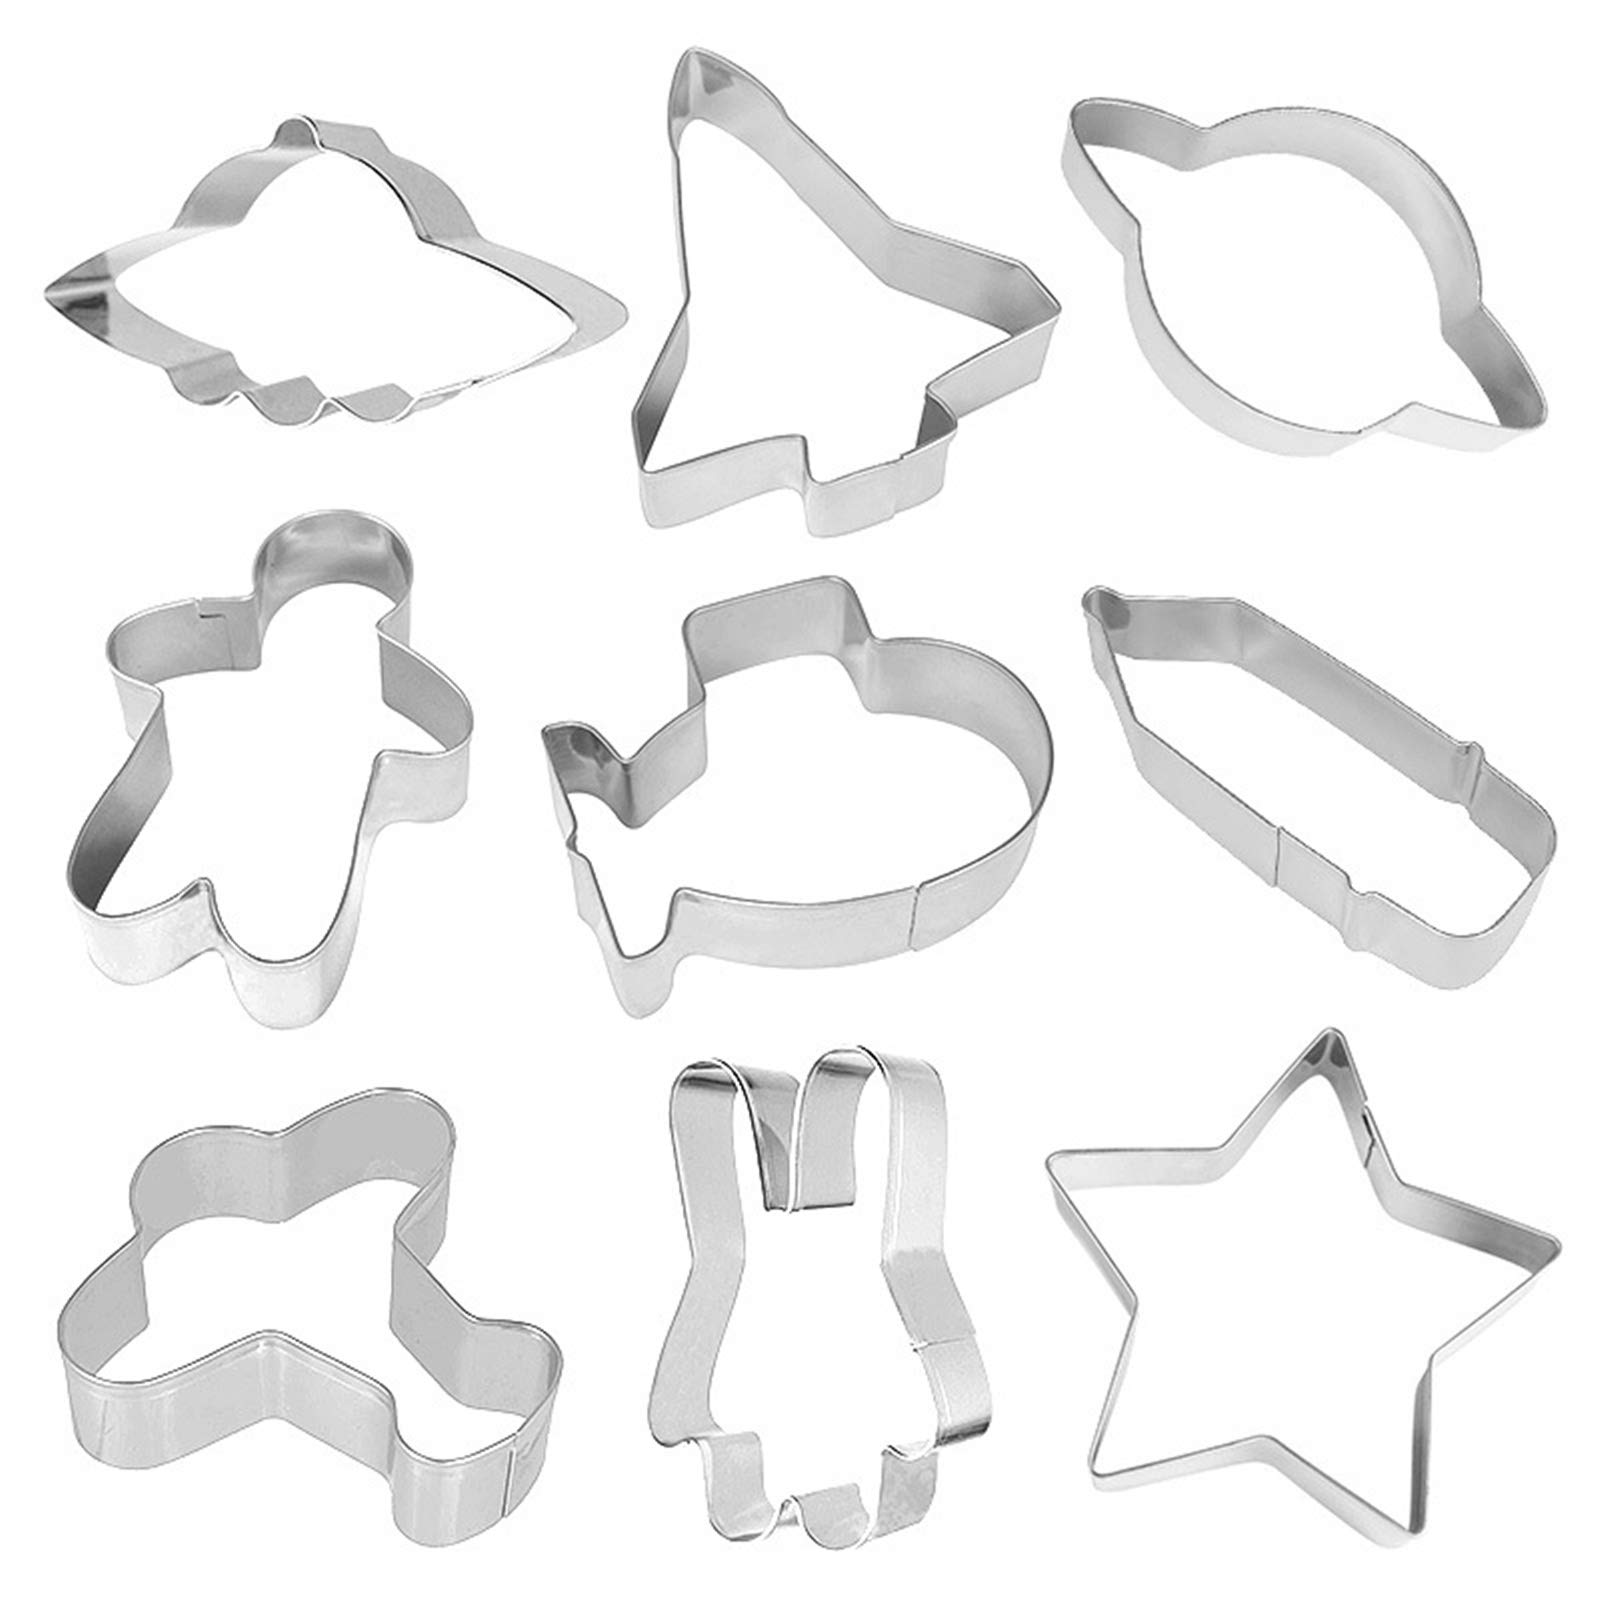 Mini Space Alien Series Cookie Cutter Set of 9 pcs, Stainless Steel Universe UFO Alien Fondant Cutters Set Pastry Biscuit Baking Clay DIY Molds for Kids